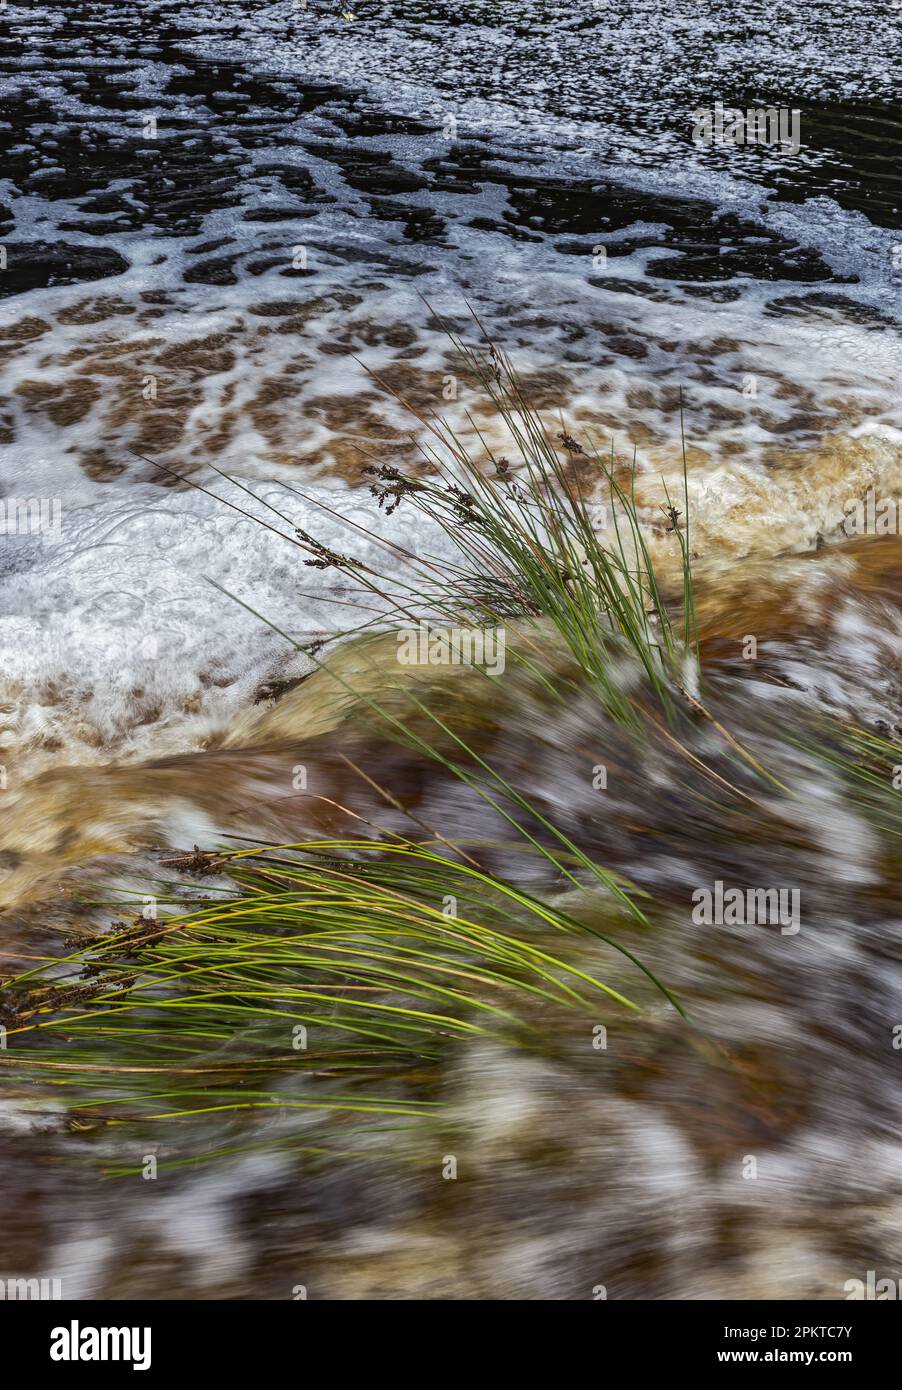 The quick flowing water of the Grootrivier River flow over reeds after heavy rains in the Tsitsikamma Mountains of the southern coastline of South Afr Stock Photo